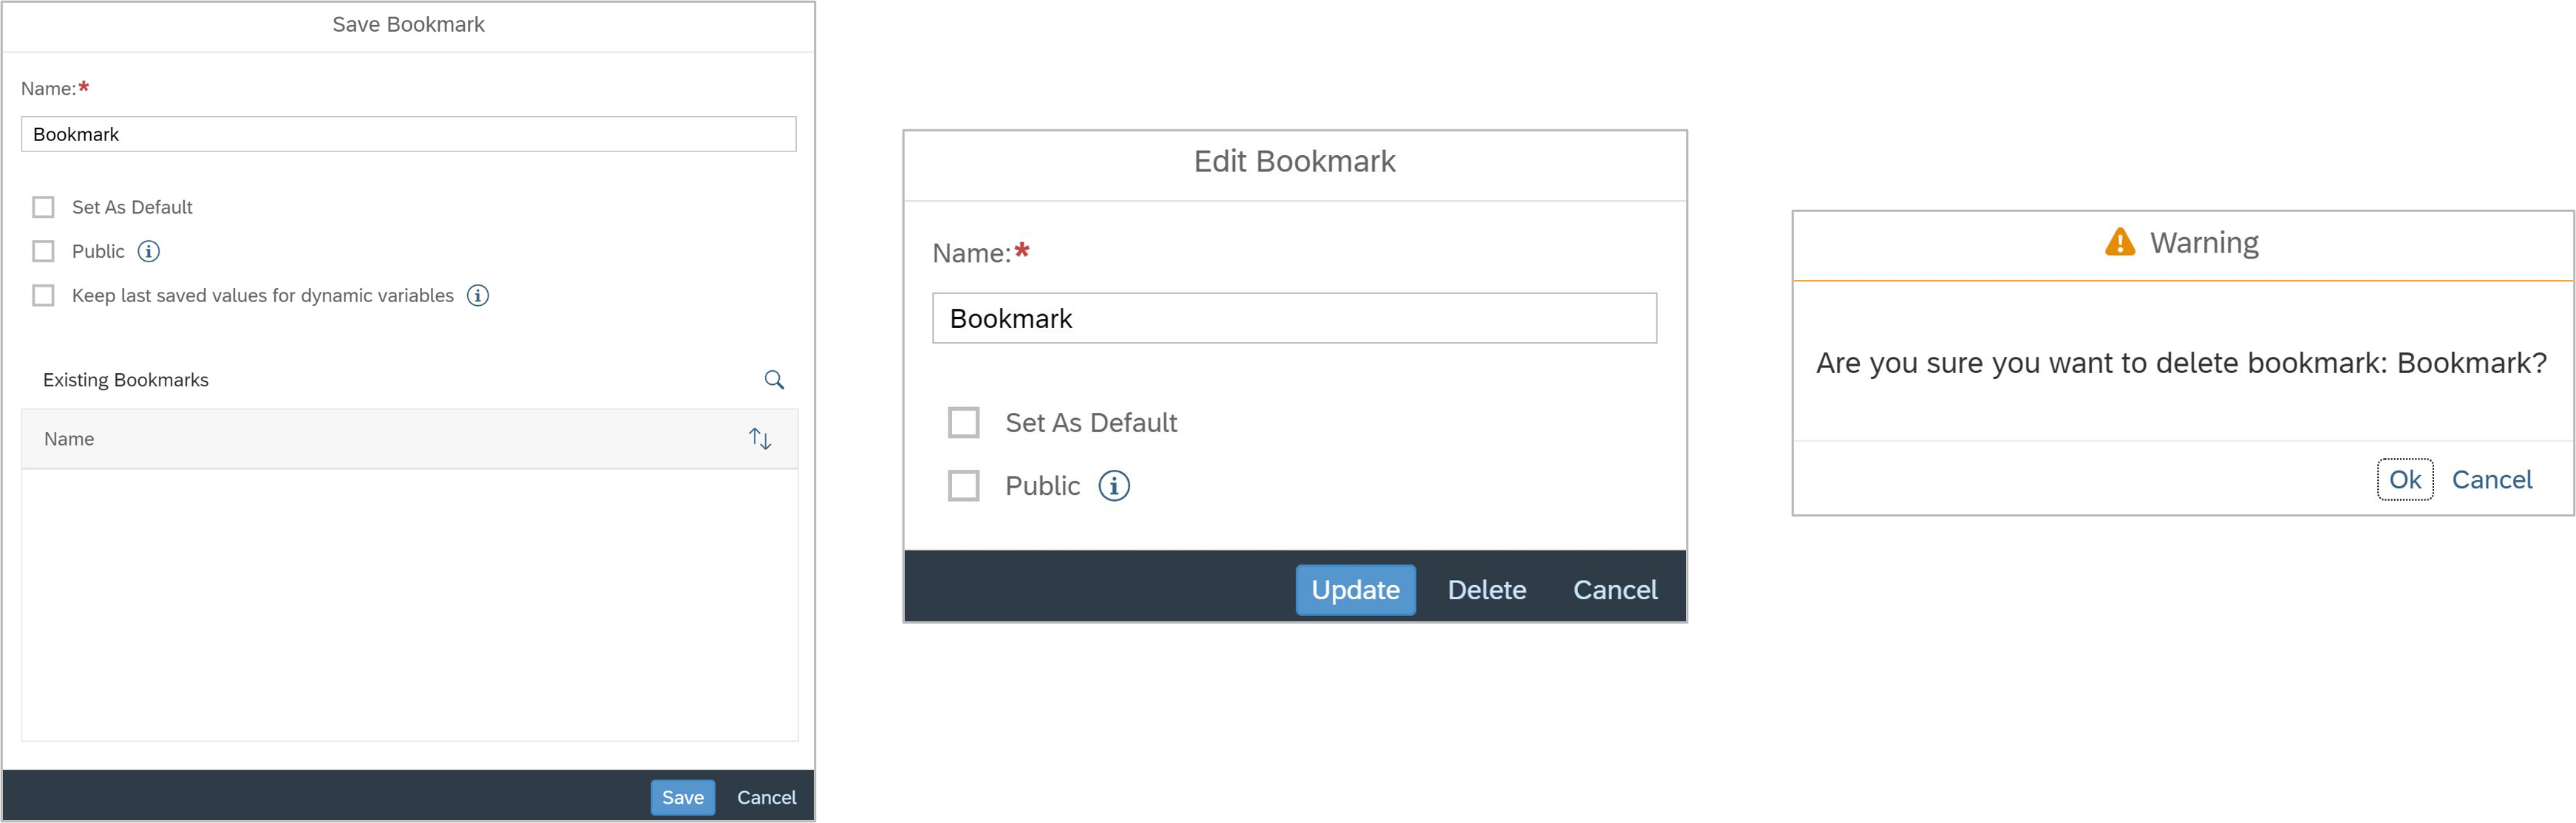 Newly added bookmark UX